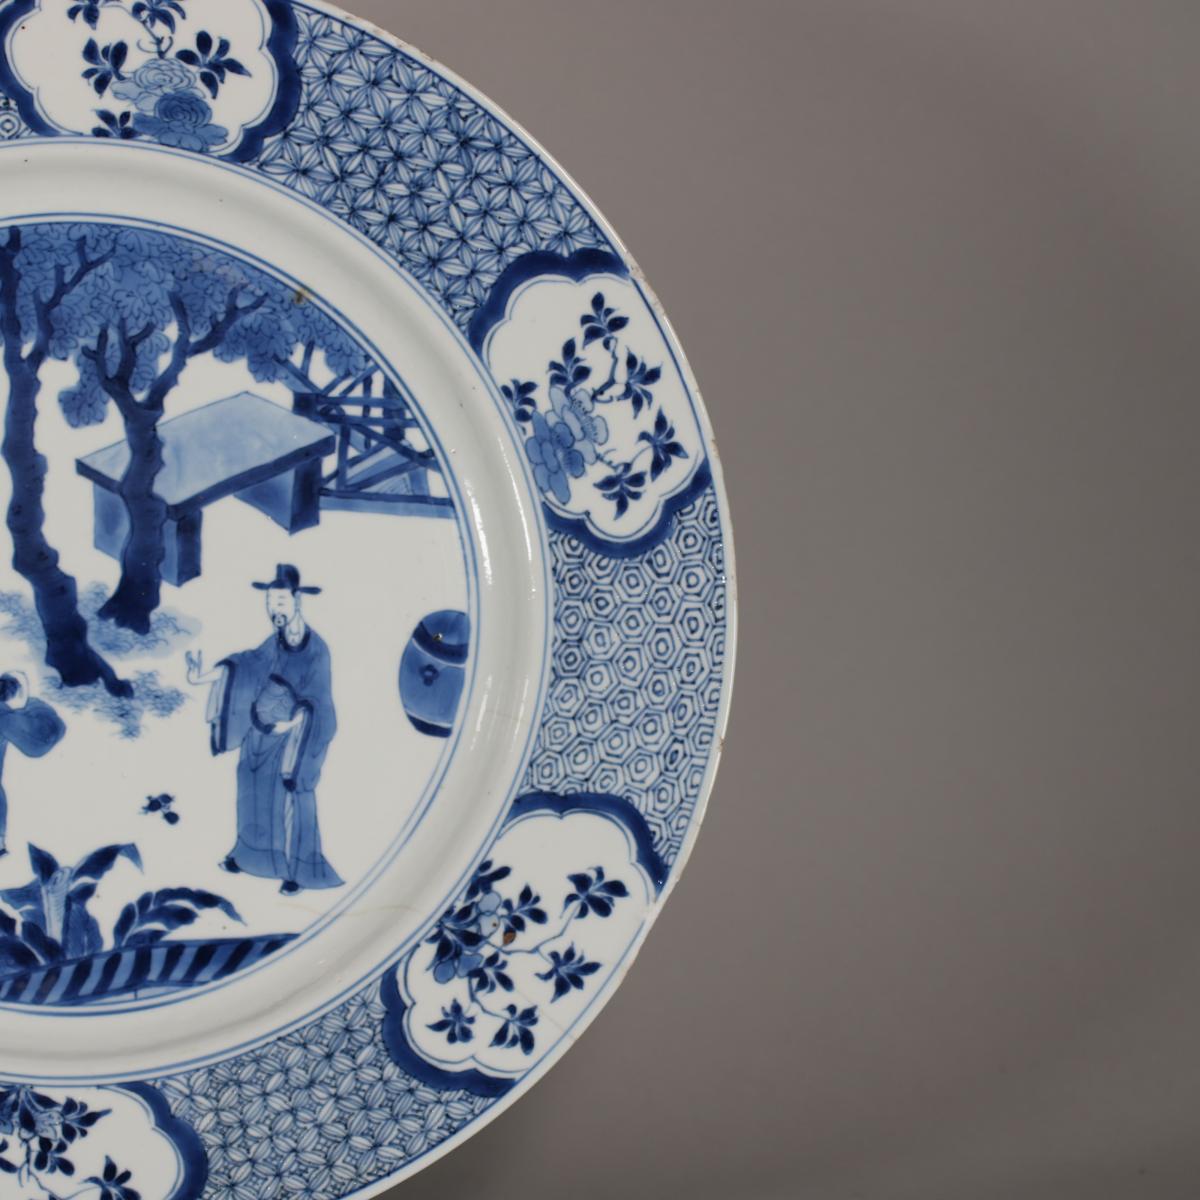 rim detail of Kangxi blue and white charger